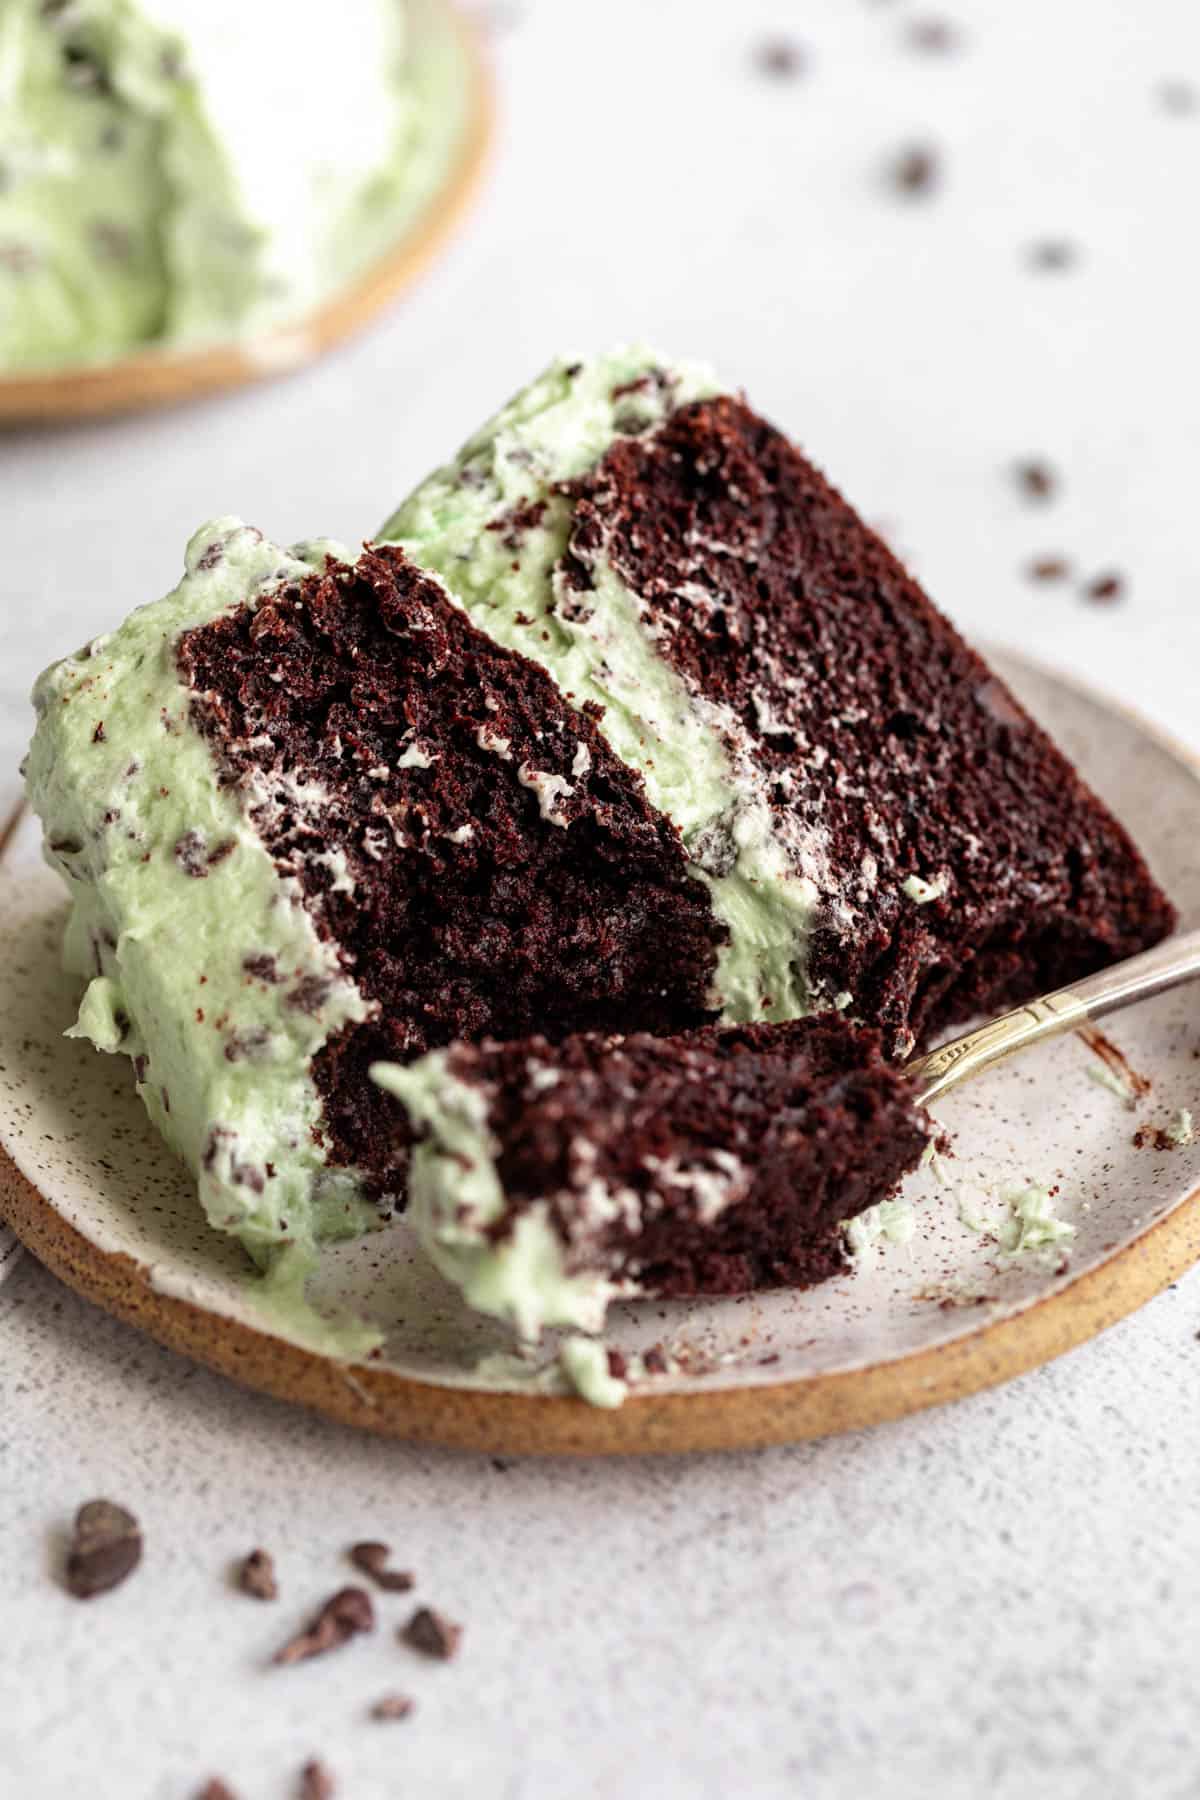 two slices of the mint chocolate cake with a bite taken out